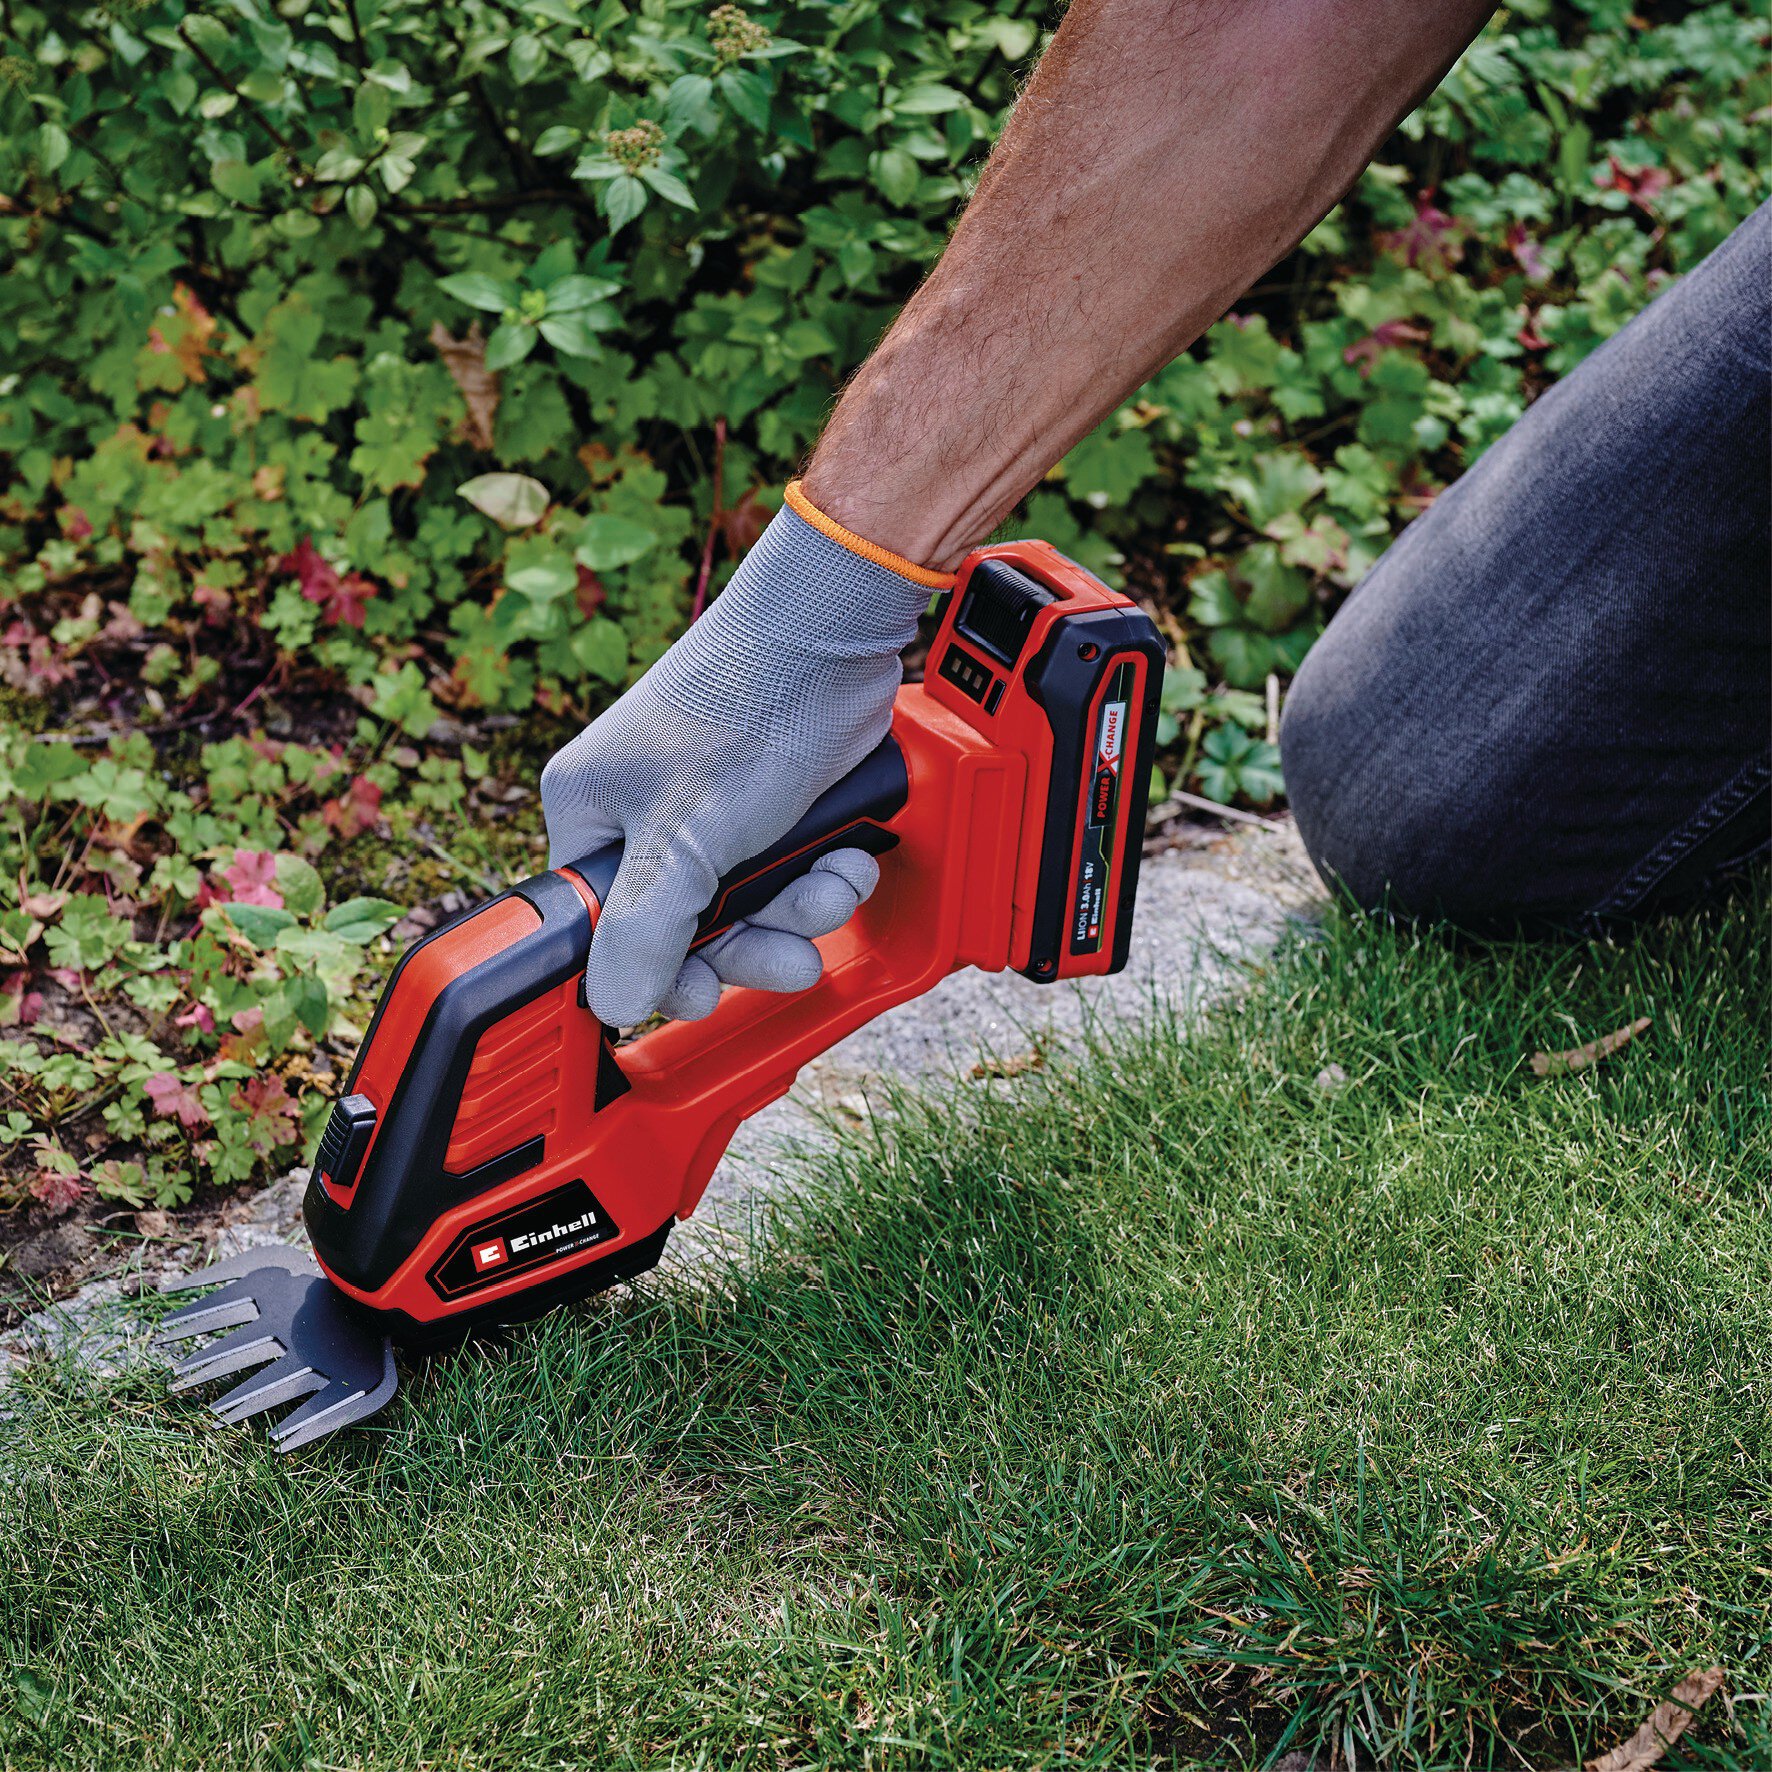 einhell-expert-cordless-grass-and-bush-shear-3410313-example_usage-001